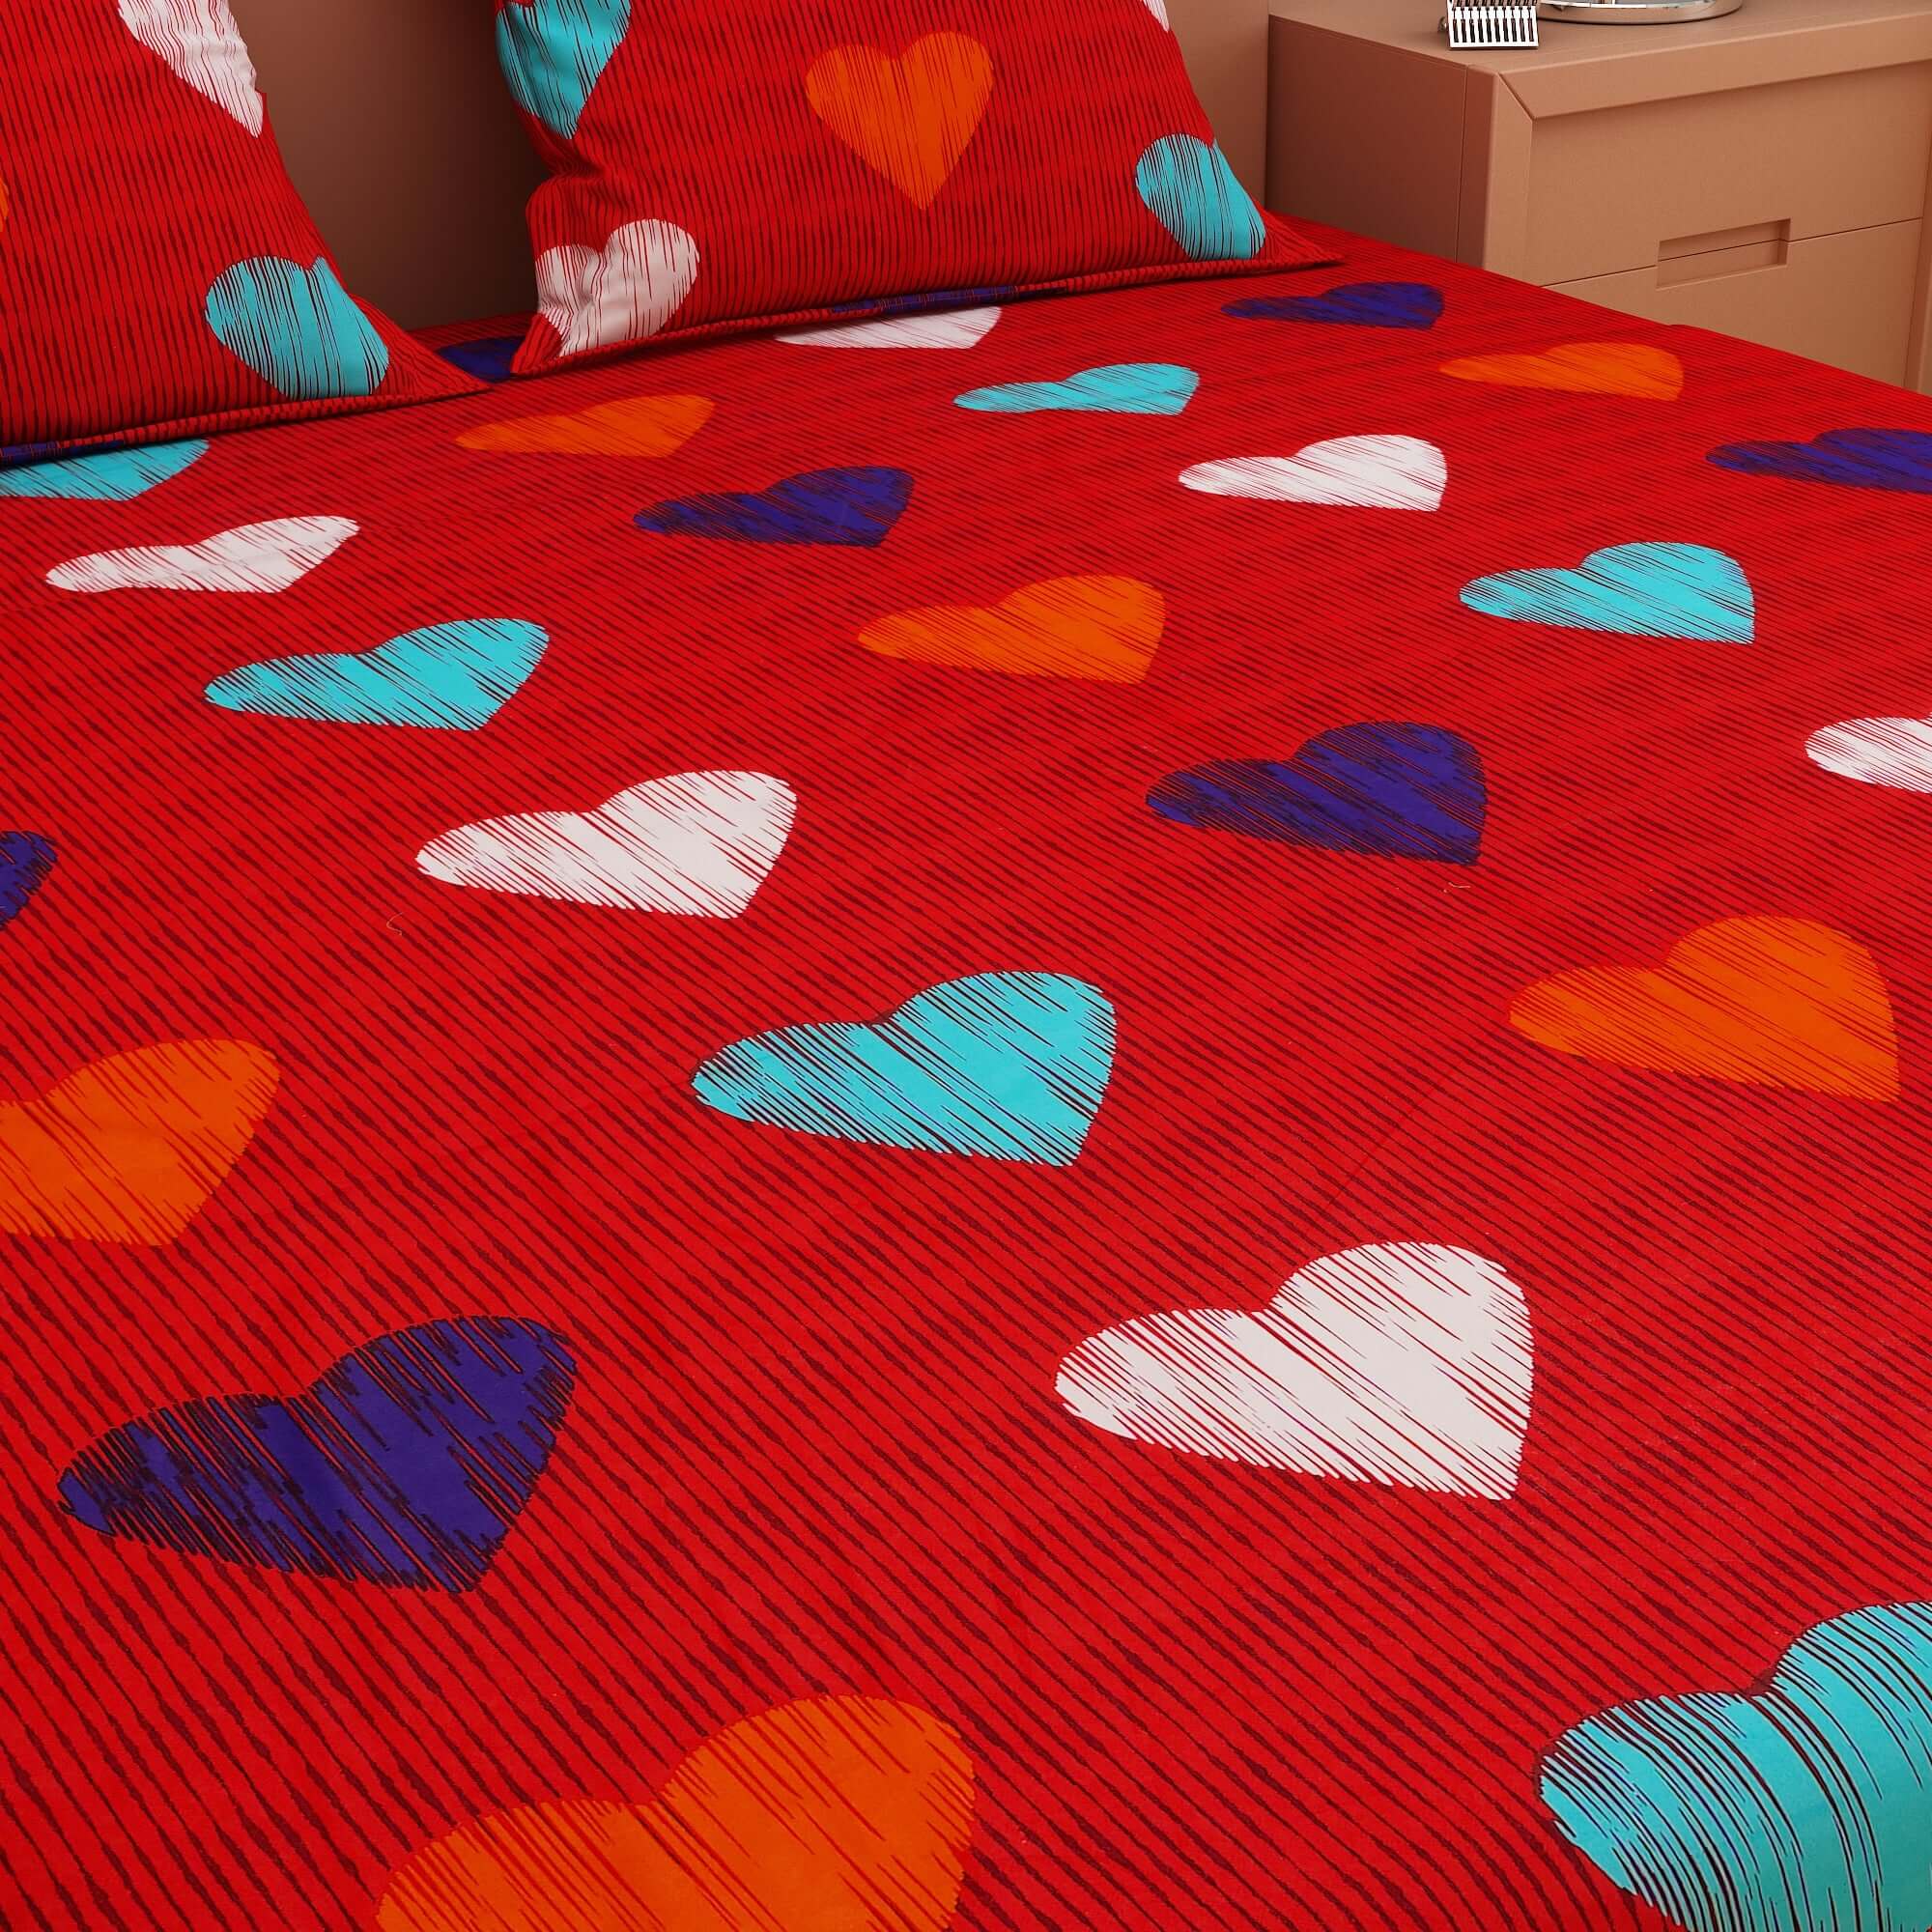 Love Print Red 120 TC 100% Pure Cotton Bedsheet - Dream Care Furnishings Private Limited